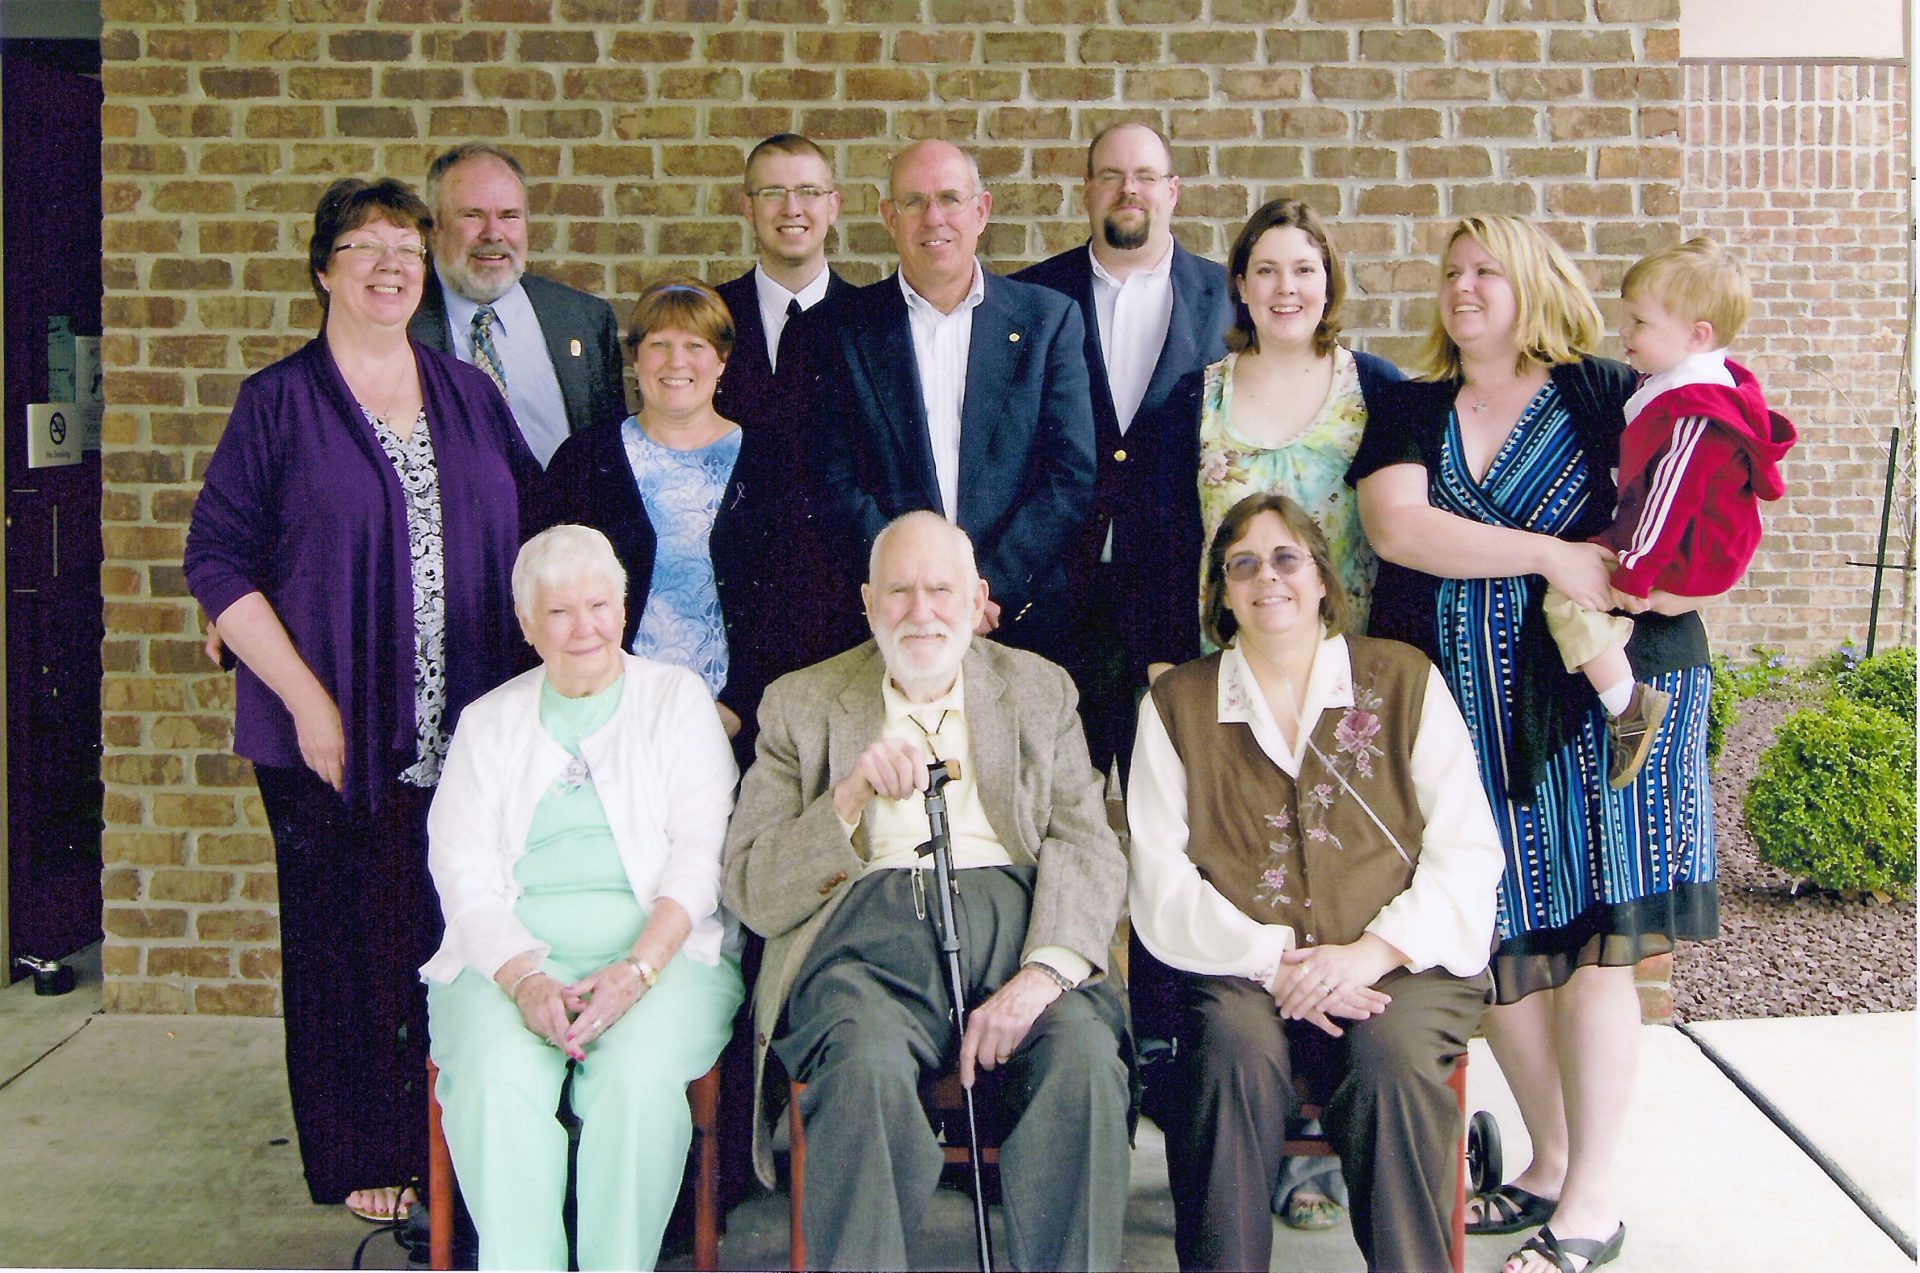 Family together at Glen's funeral